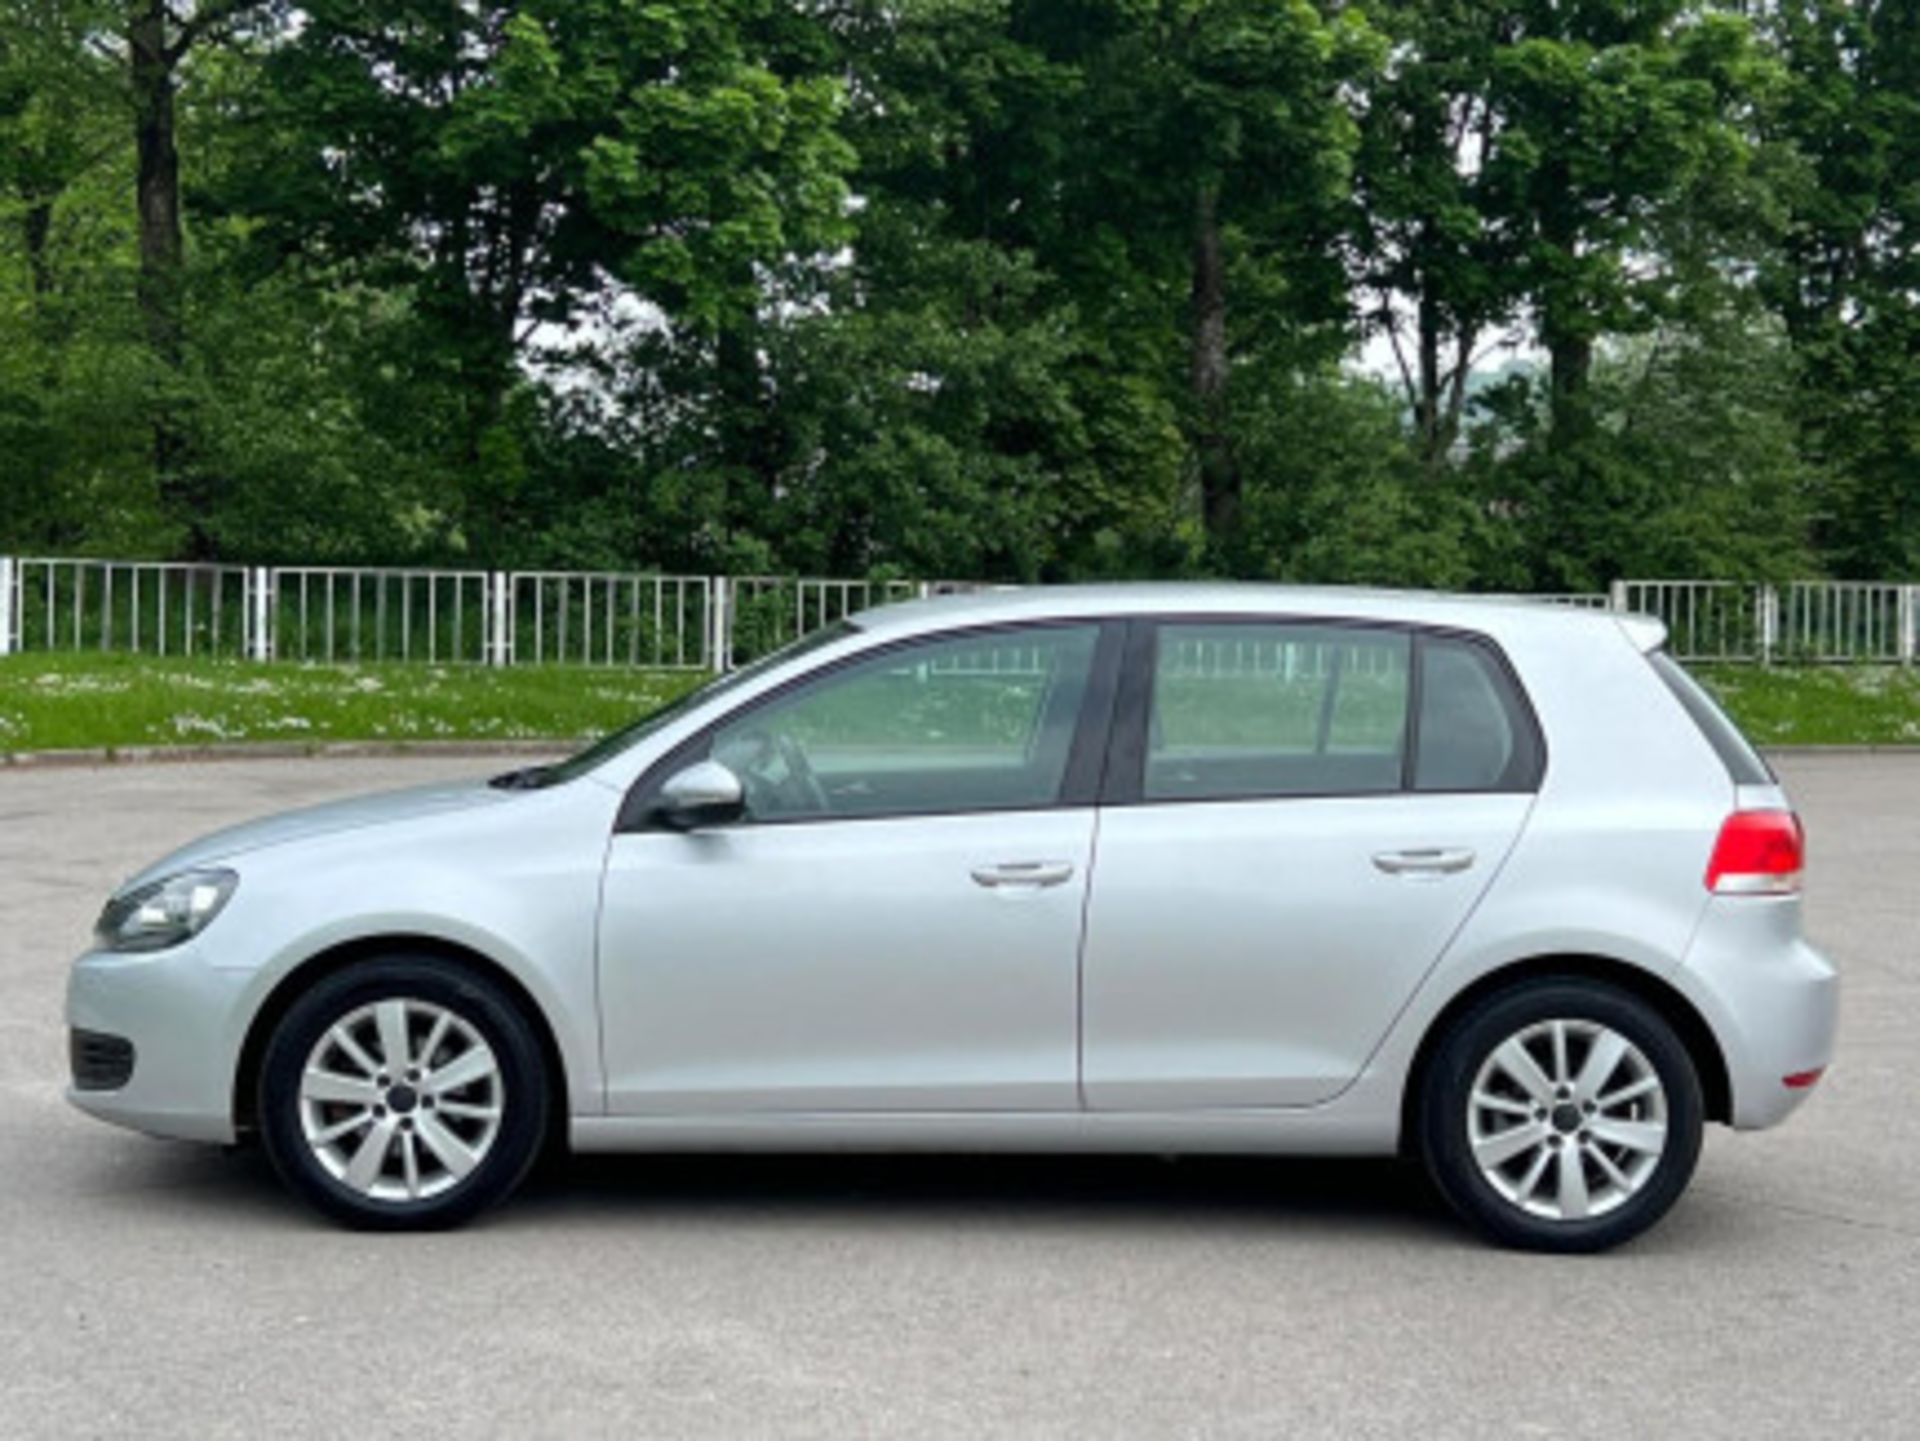 IMPECCABLE 2012 VOLKSWAGEN GOLF 1.6 TDI MATCH >>--NO VAT ON HAMMER--<< - Image 51 of 116